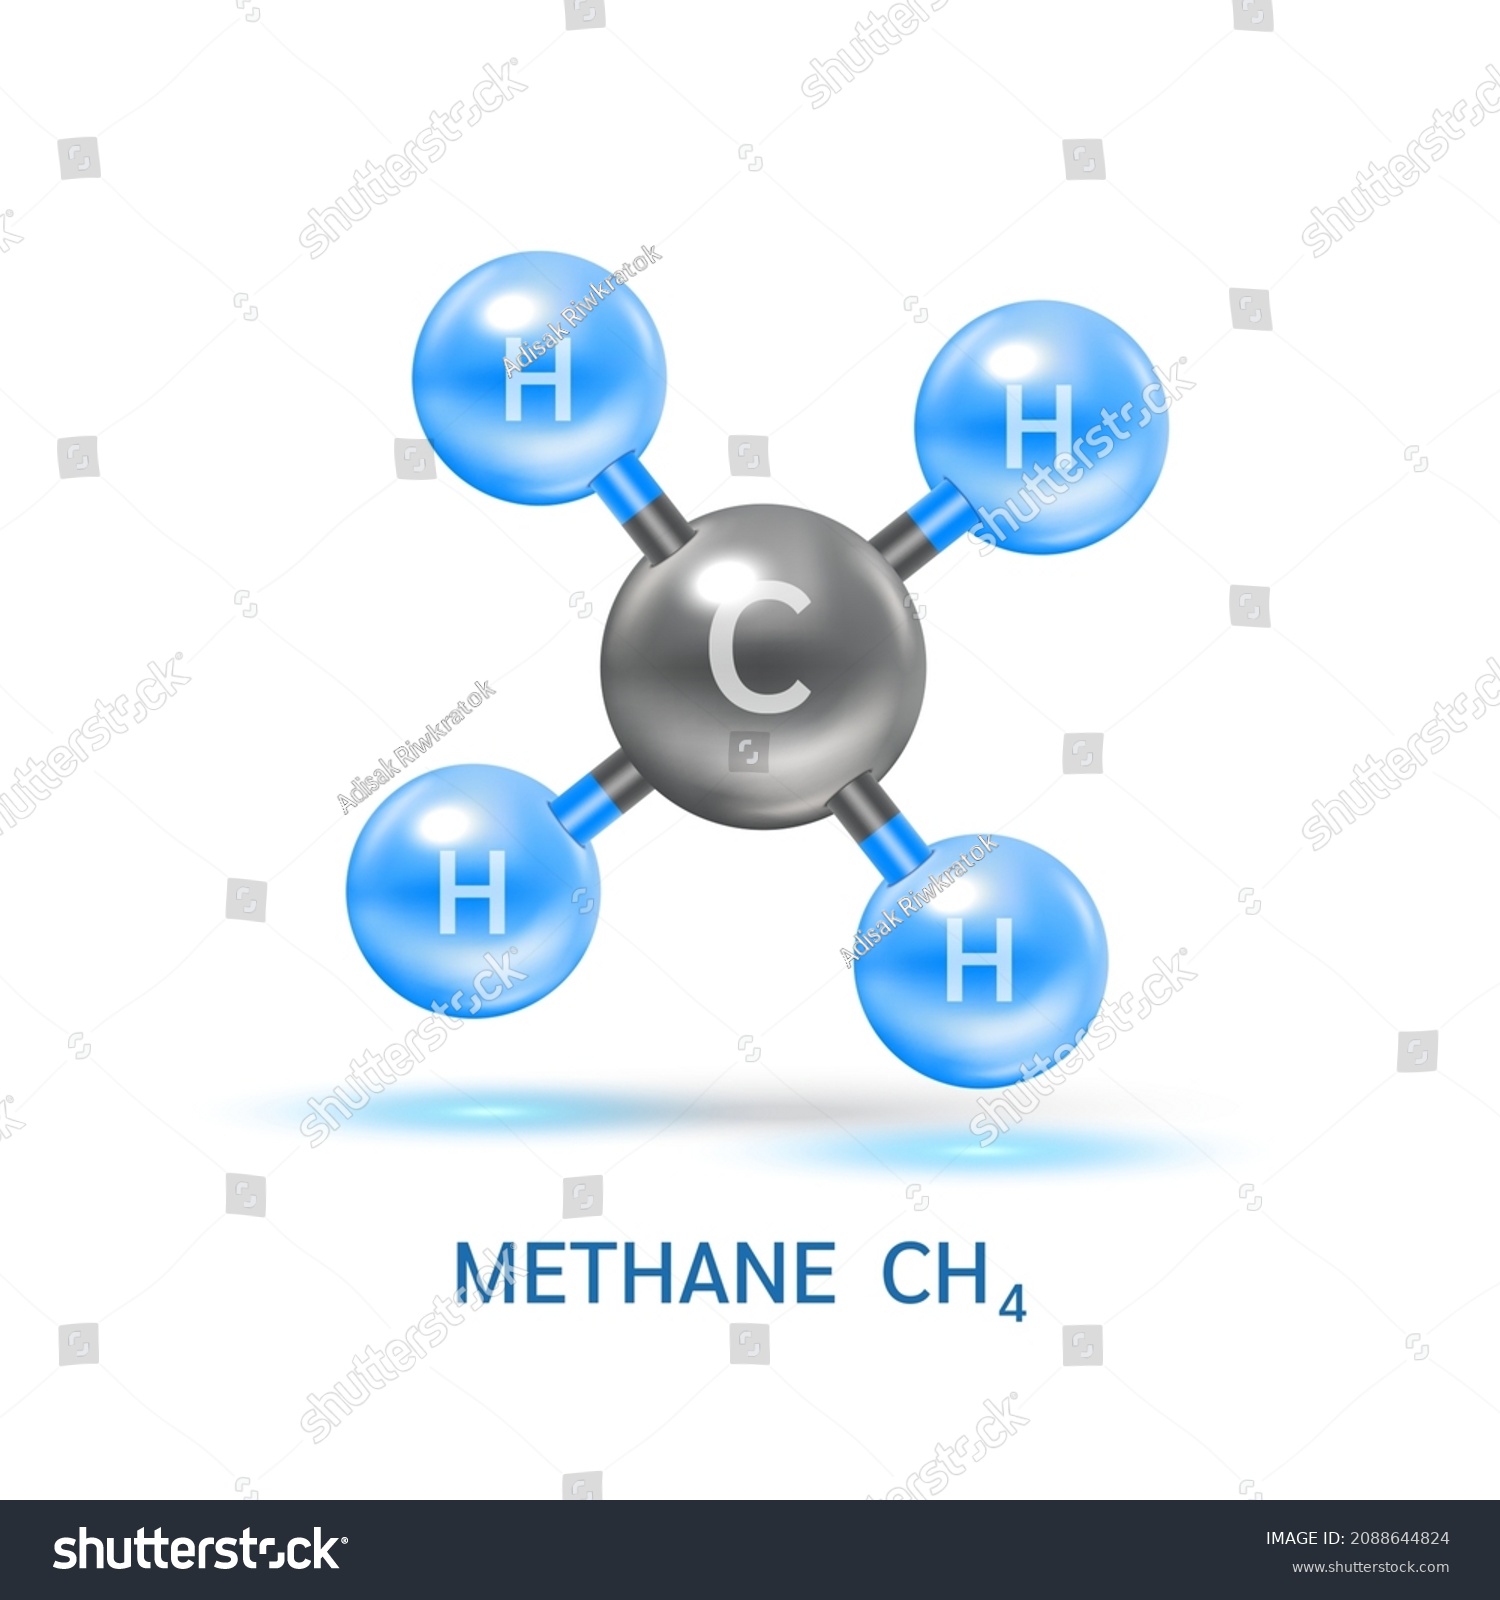 Methane Gas Ch4 Molecule Models Physical Stock Vector (Royalty Free ...